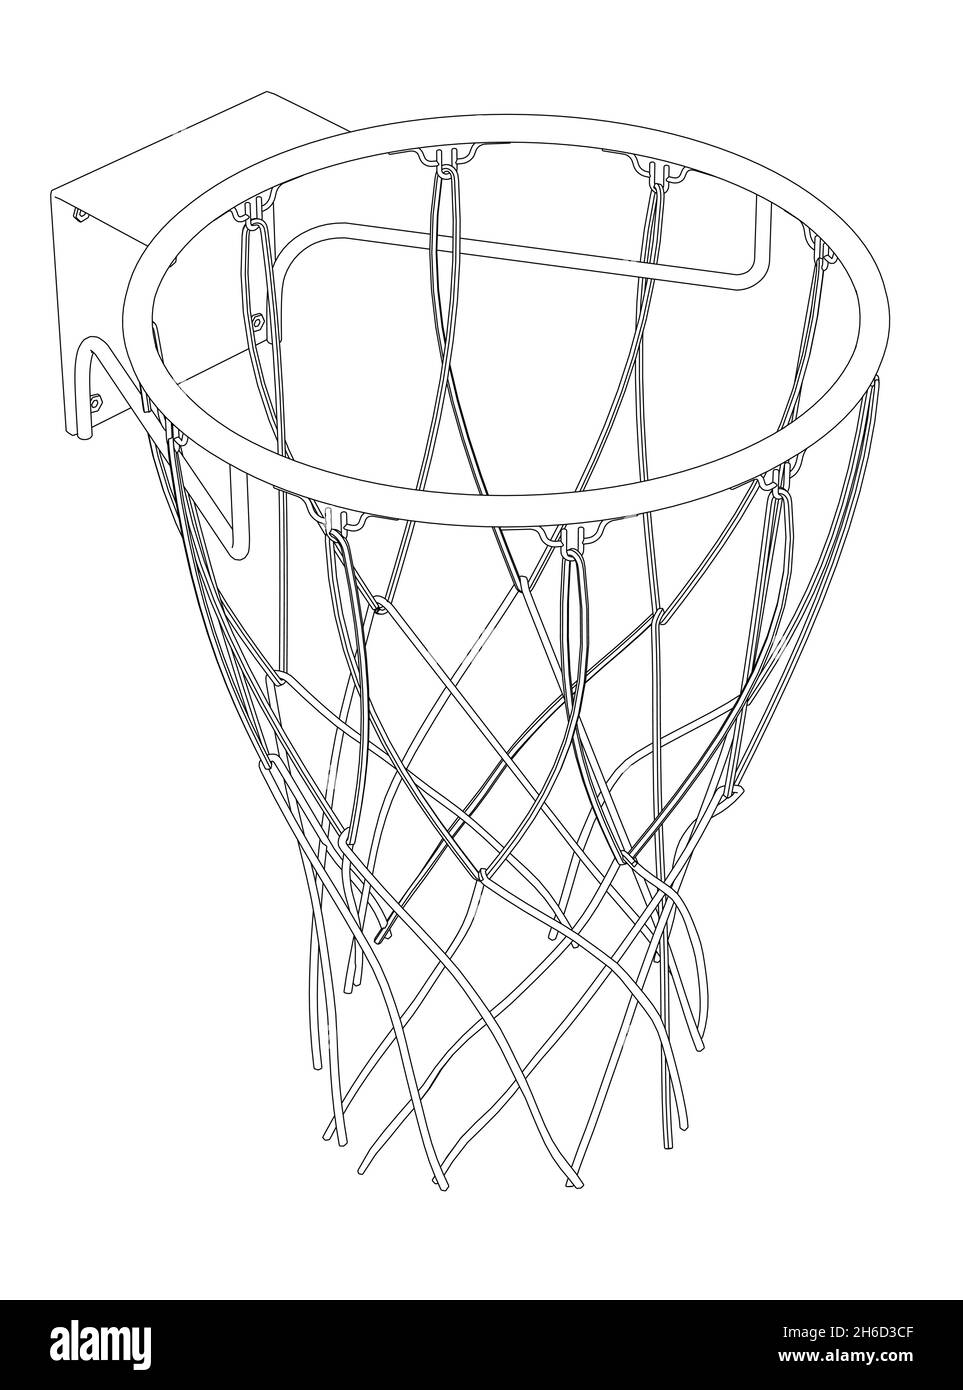 Basketball hoop contour from black lines isolated on white background. Isometric view. Vector illustration Stock Vector